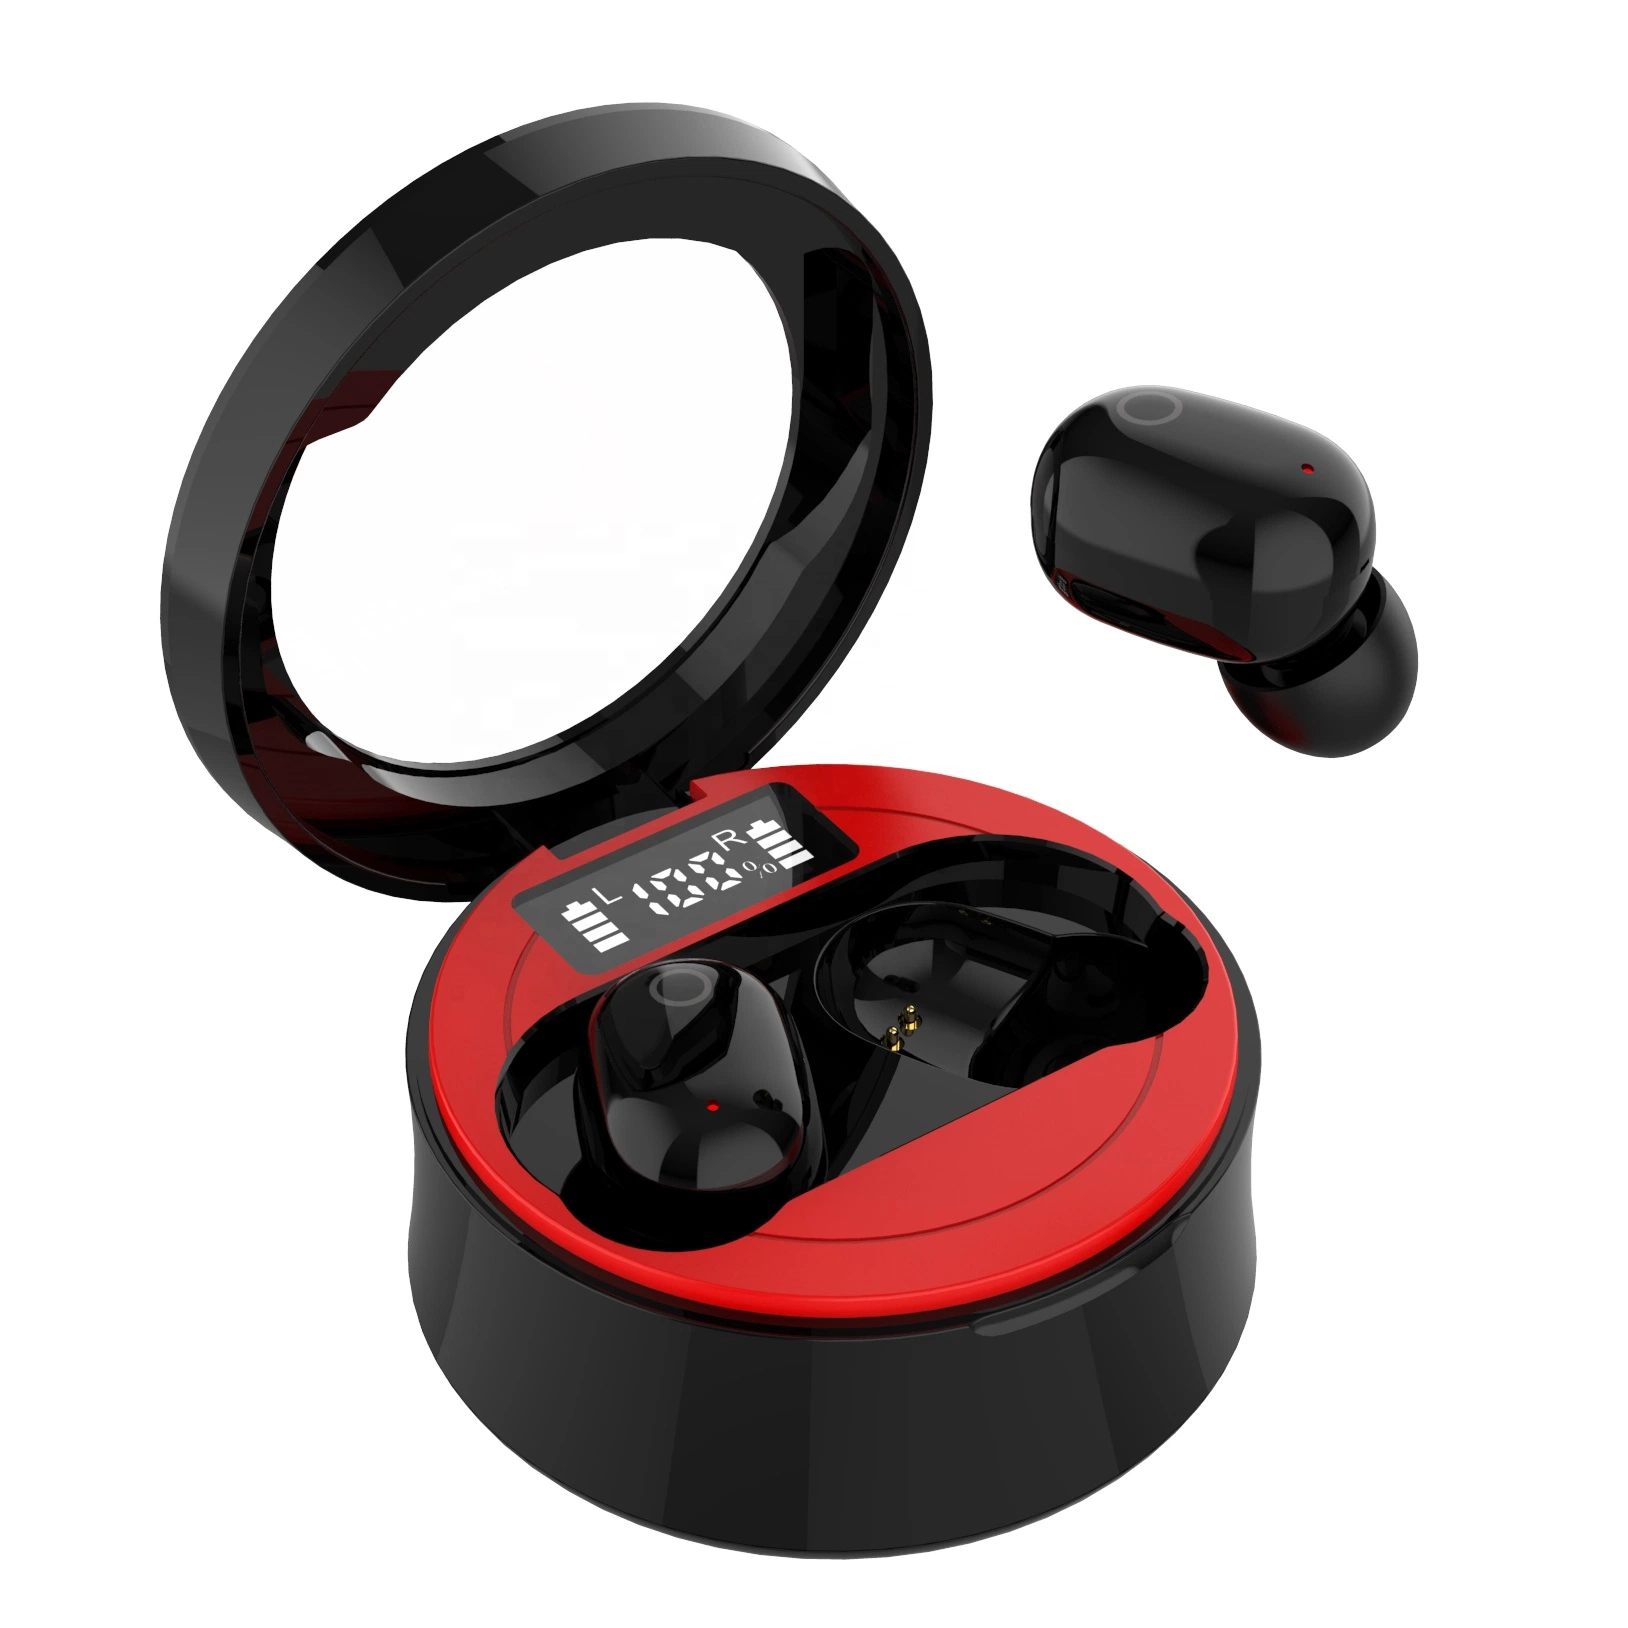 Comfortable in Ear Tws Earphone Headphone for Mobile Phone, Computer, iPad, Notebook and Gamer Tool